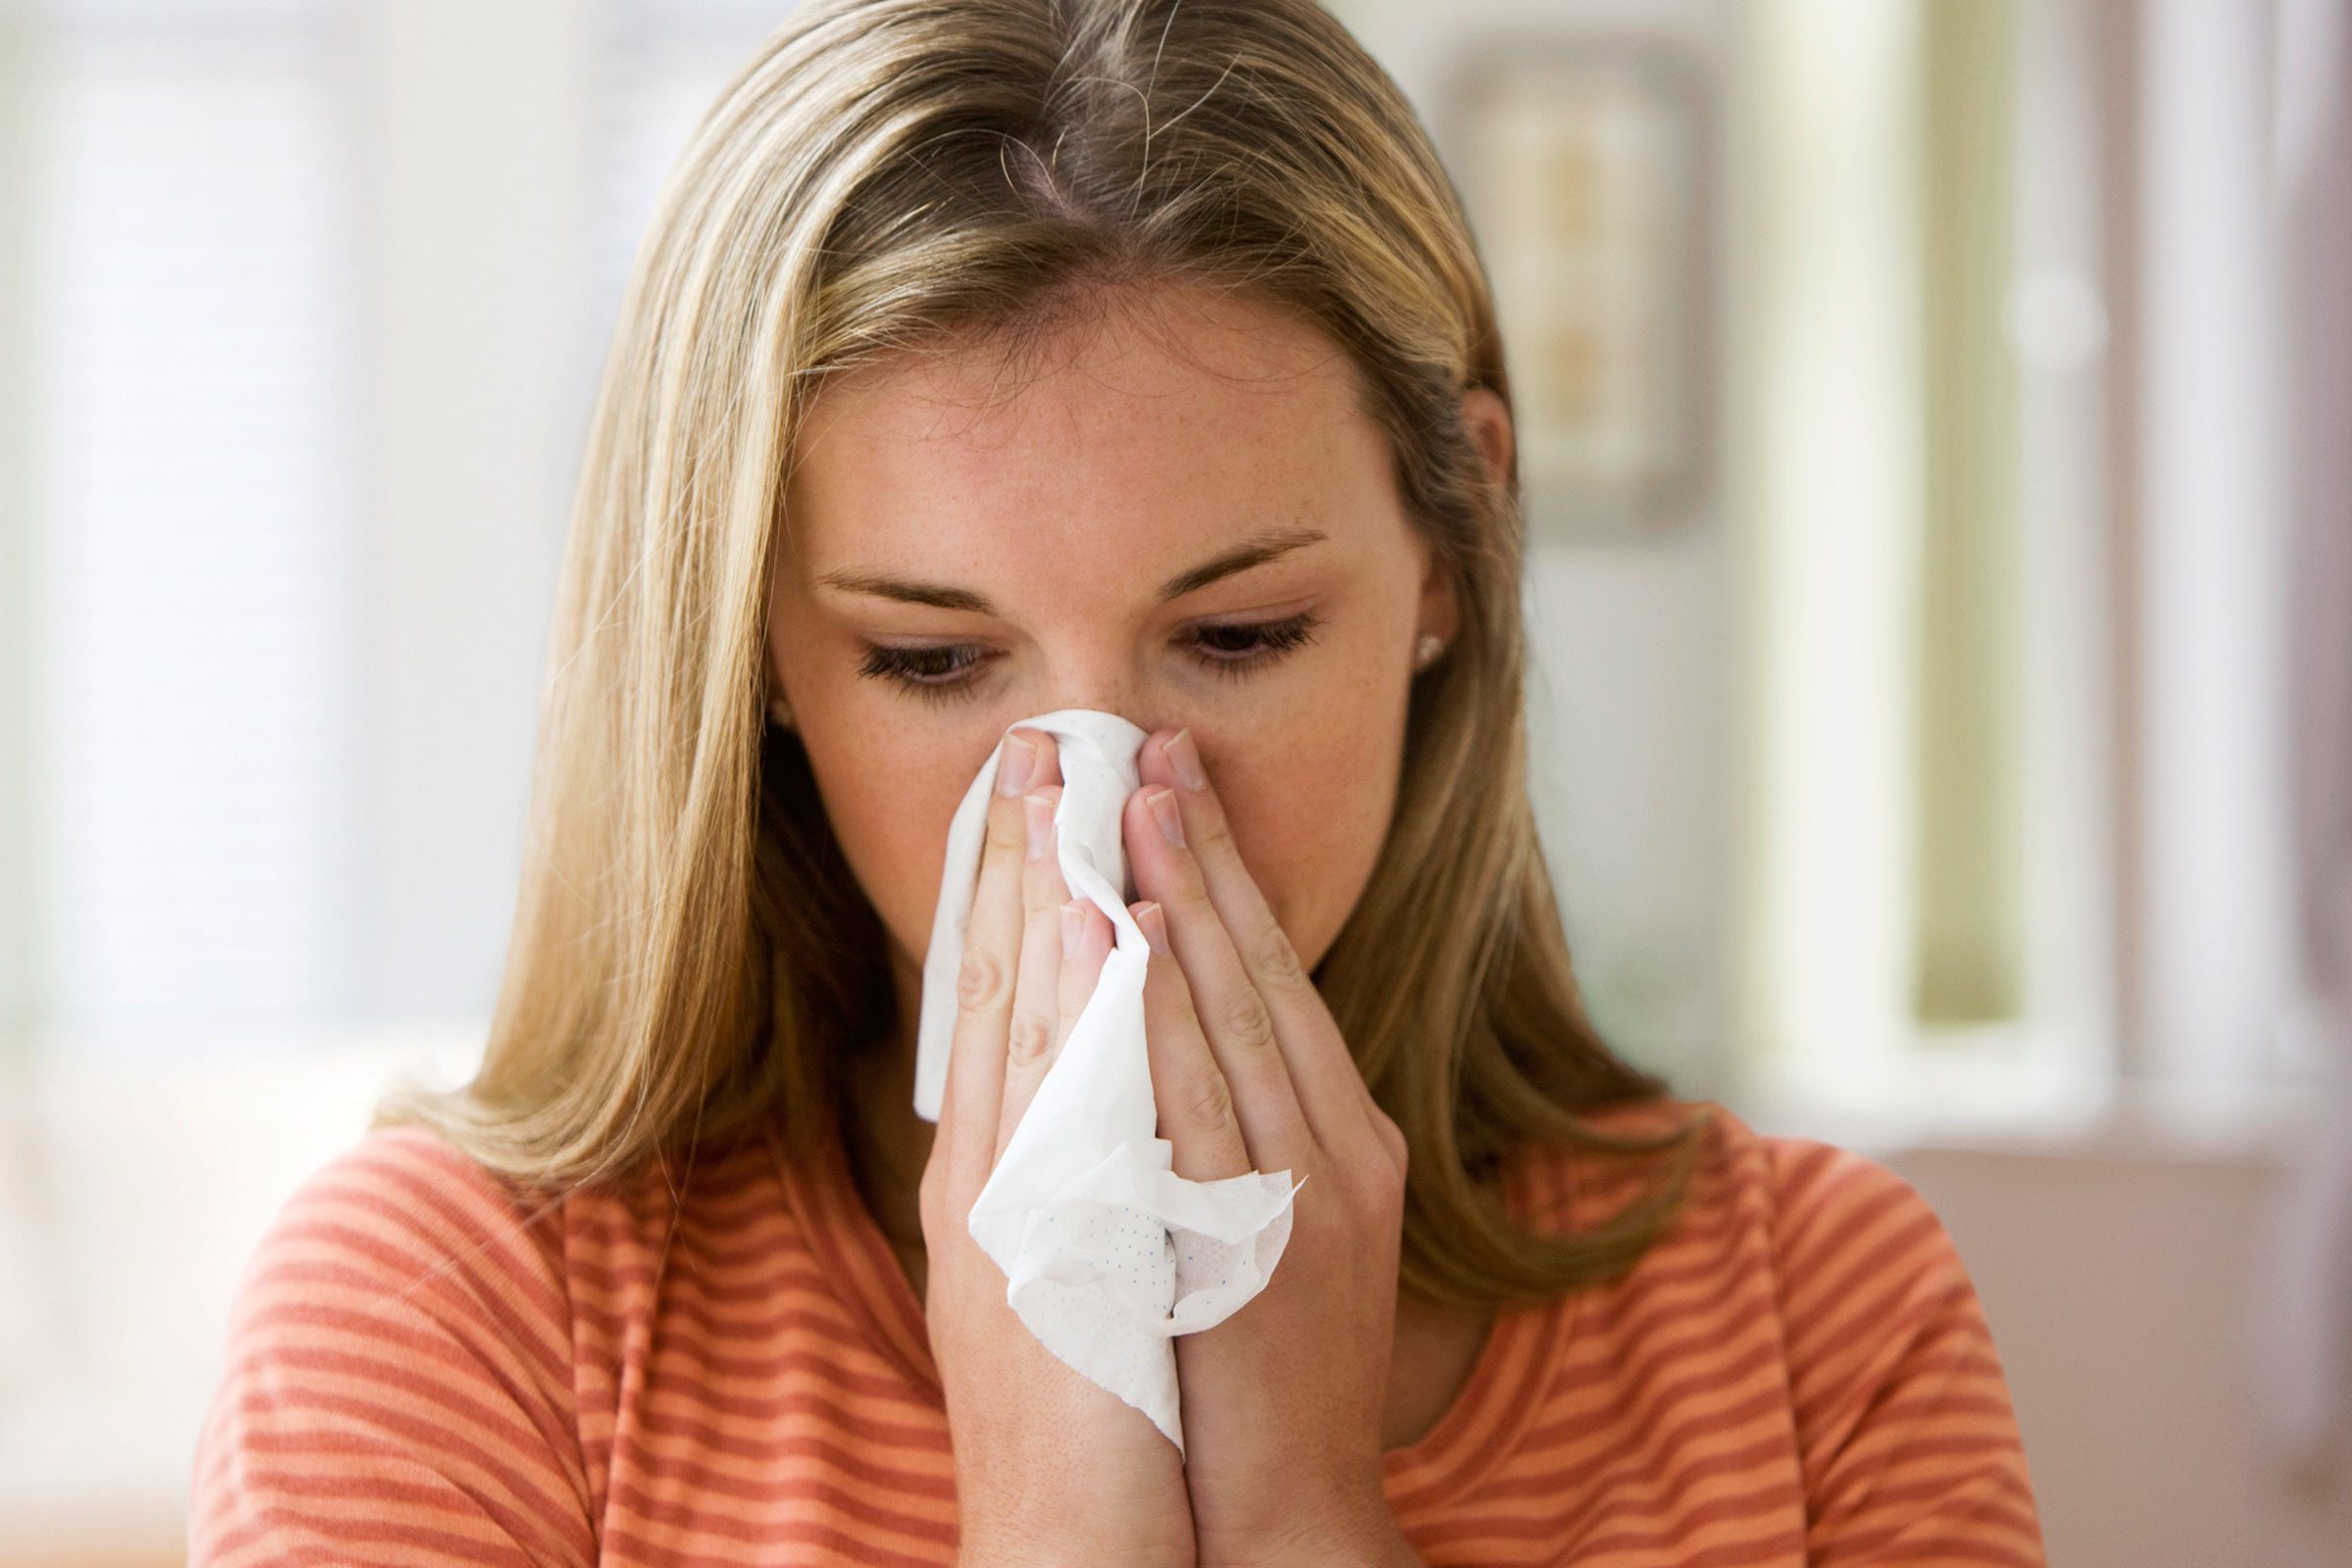 How to Avoid a Red, Peeling Nose When You’ve Got the Sniffles